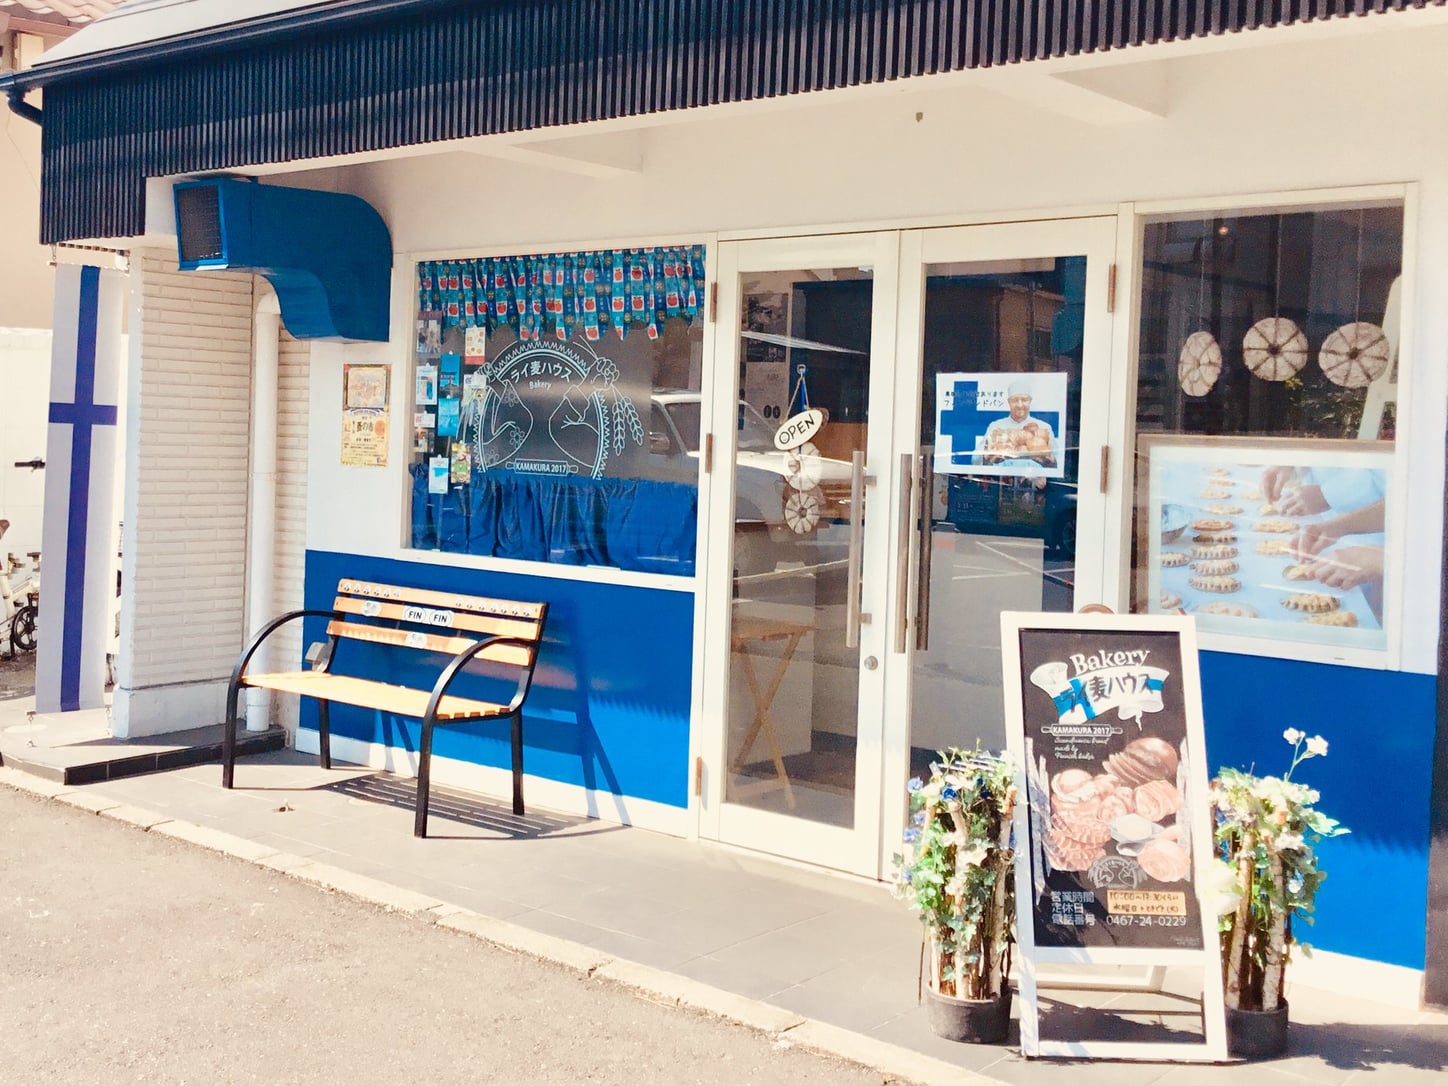 Rare Foodie Finds: A Taste of Finland at the Raimugi House Bakery in Kamakura